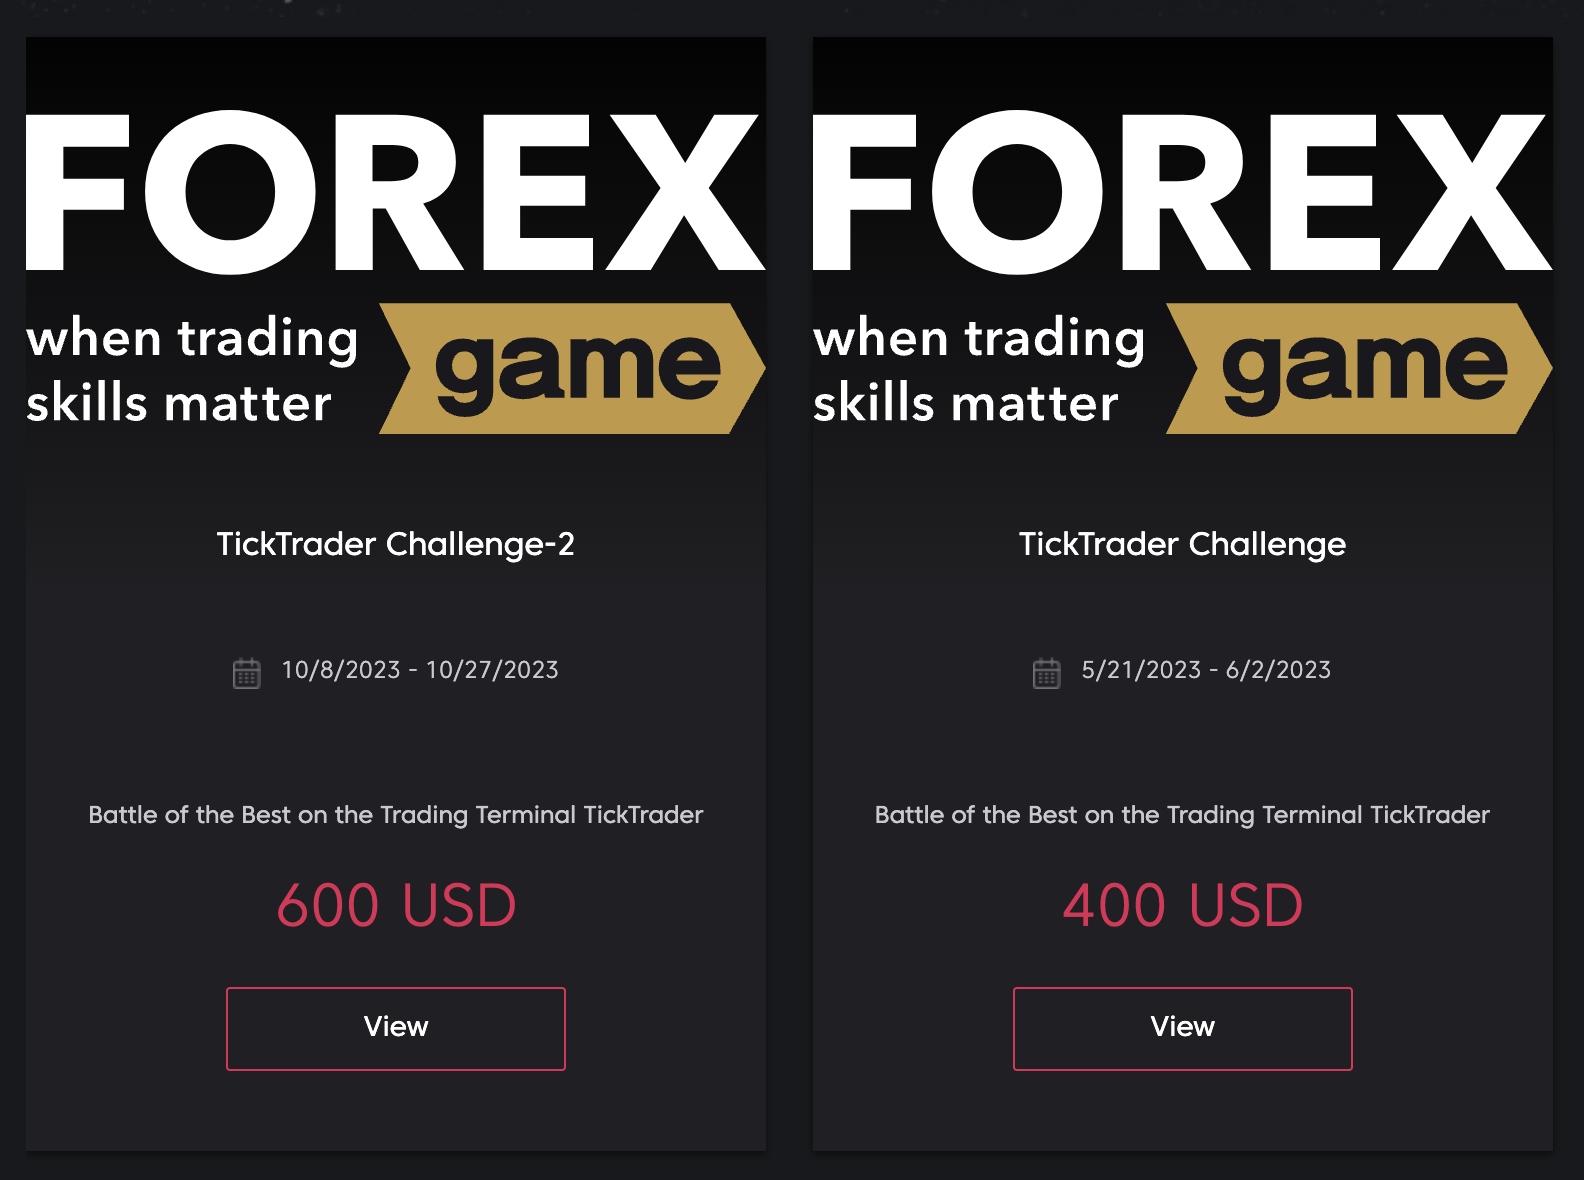 Forex trading competitions at FXOpen broker